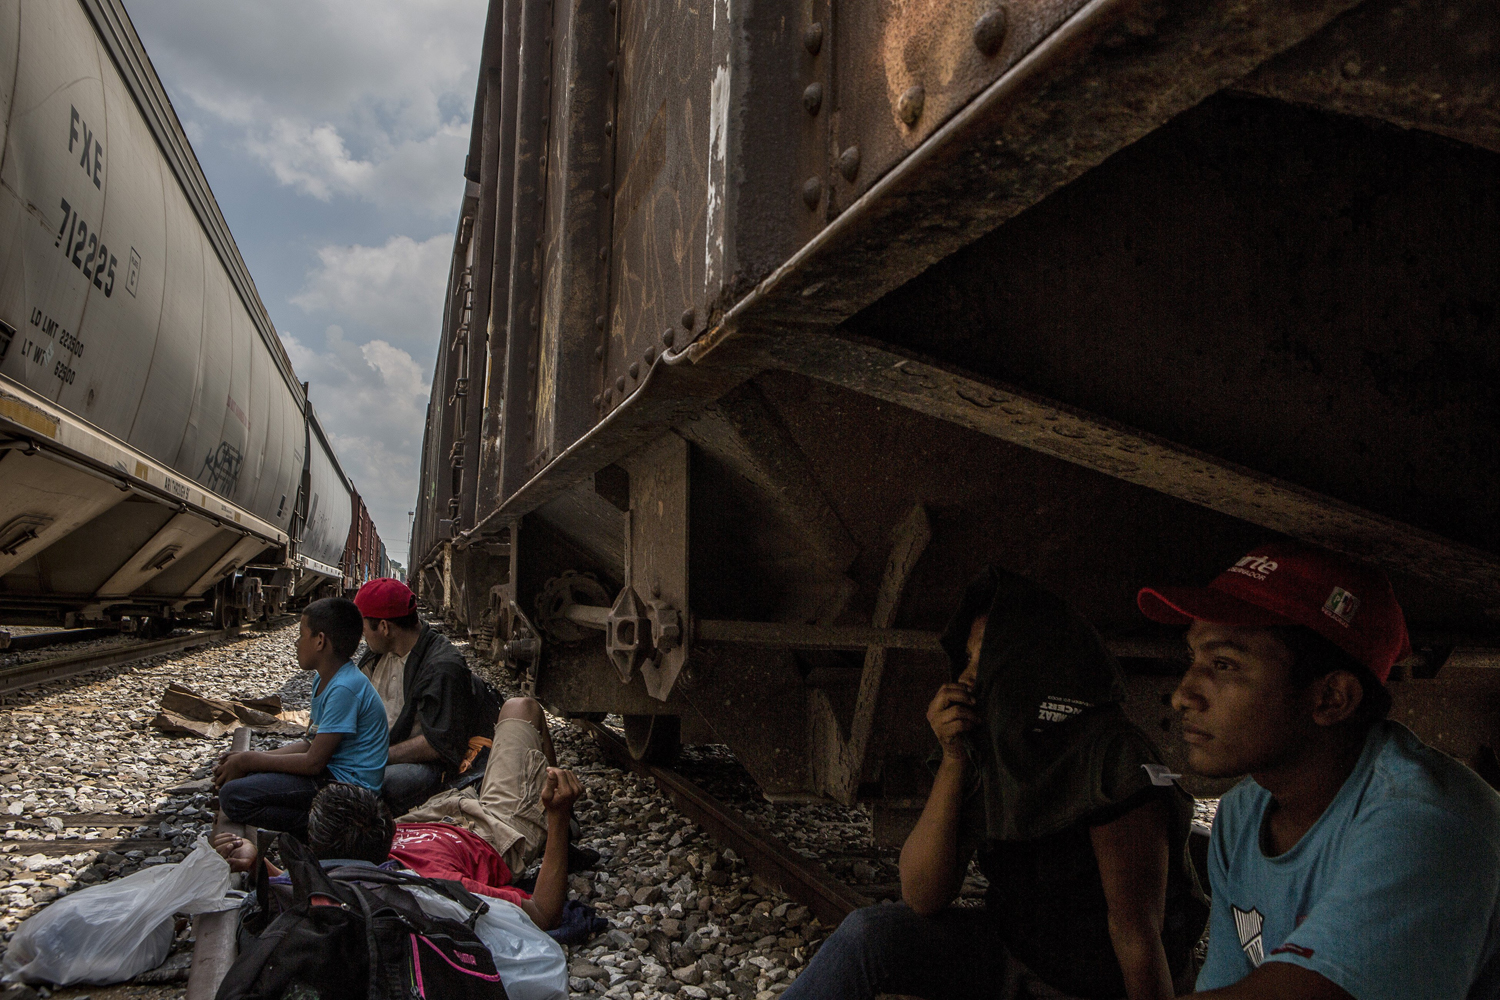 Eight-year-old Carlos Alberto Cruz Menjivar, left, who is traveling with his father, and others wait for the next train heading north, in Tierra Blanca, Mexico, Sept. 18, 2014.